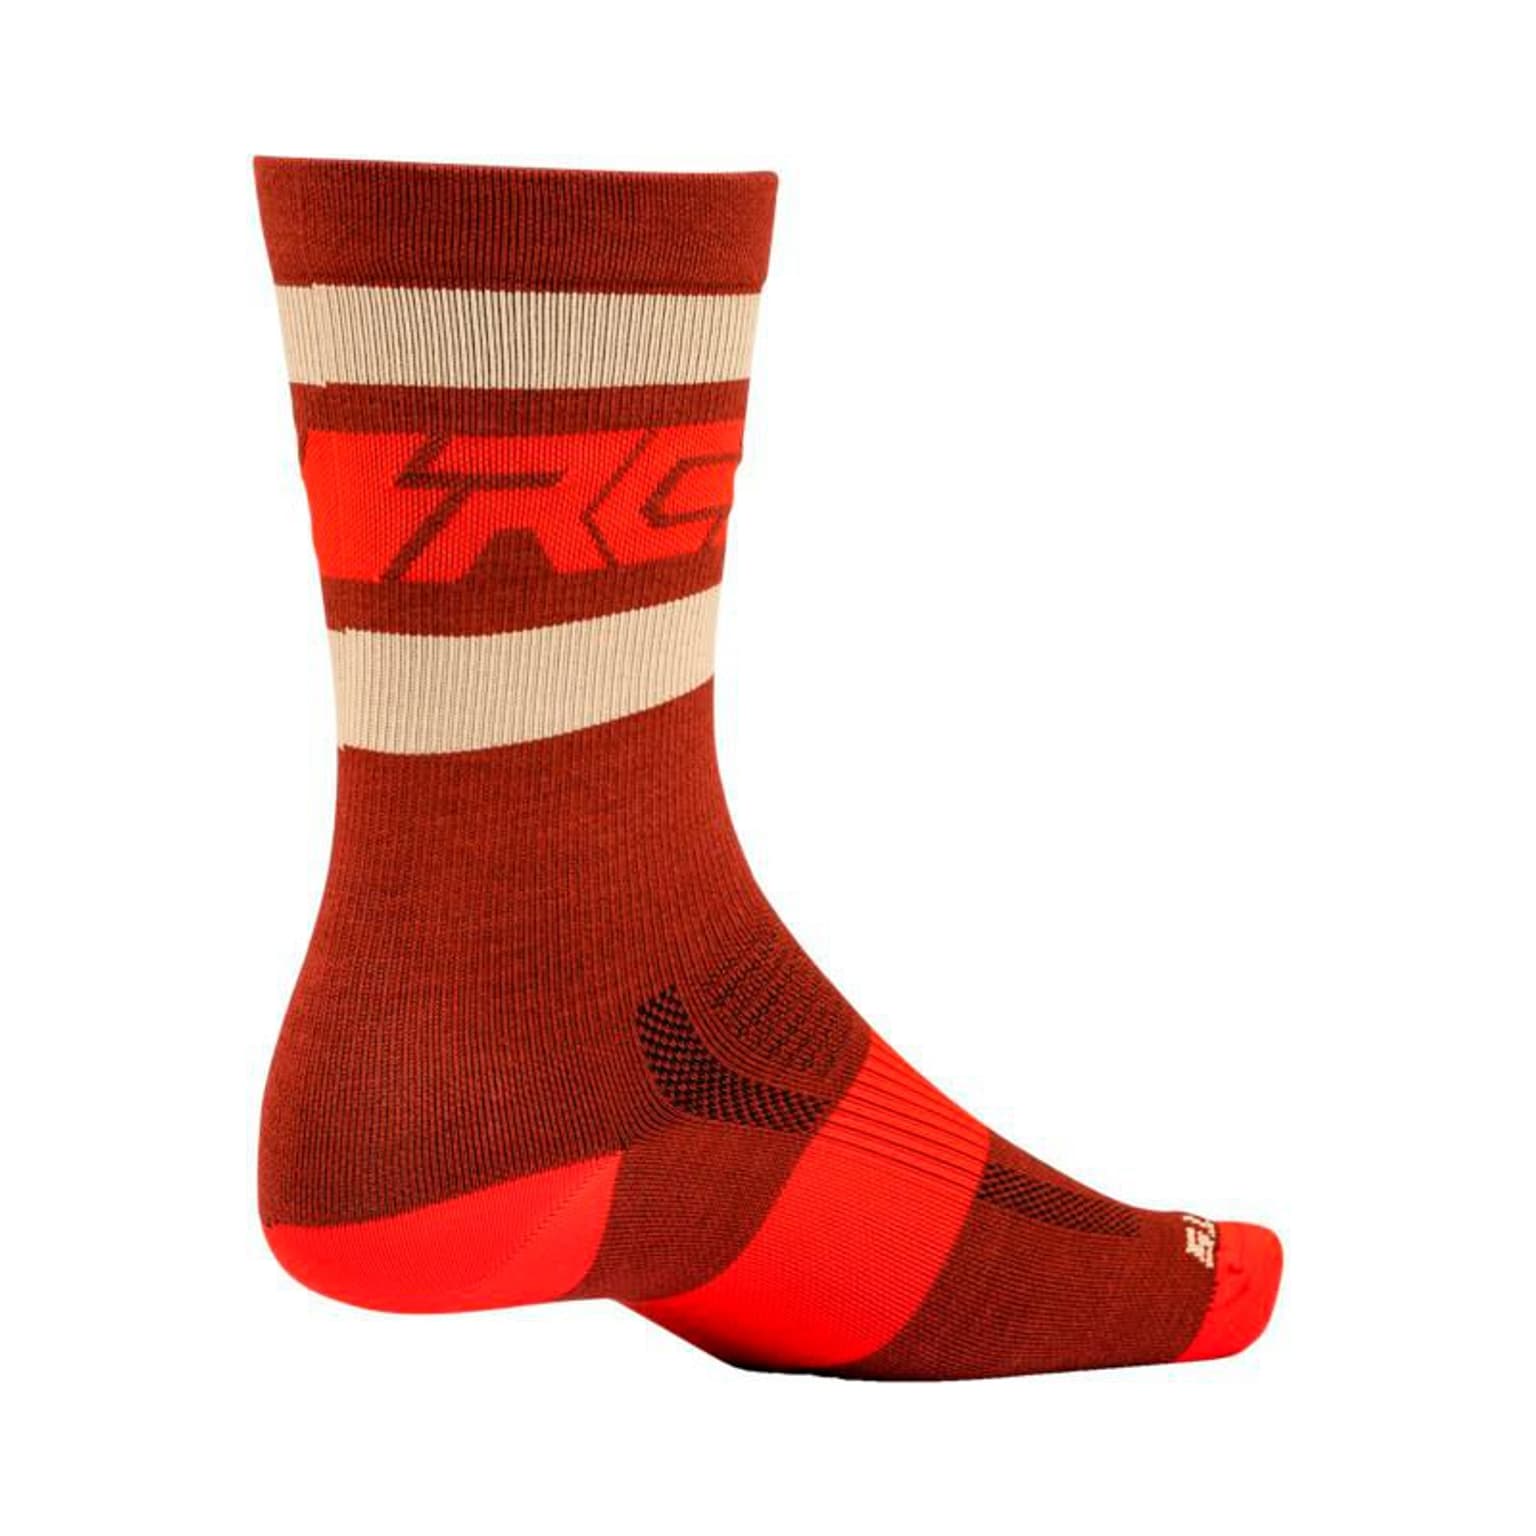 Ride Concepts Ride Concepts Woll Fifty-Fifty Velosocken rot 2